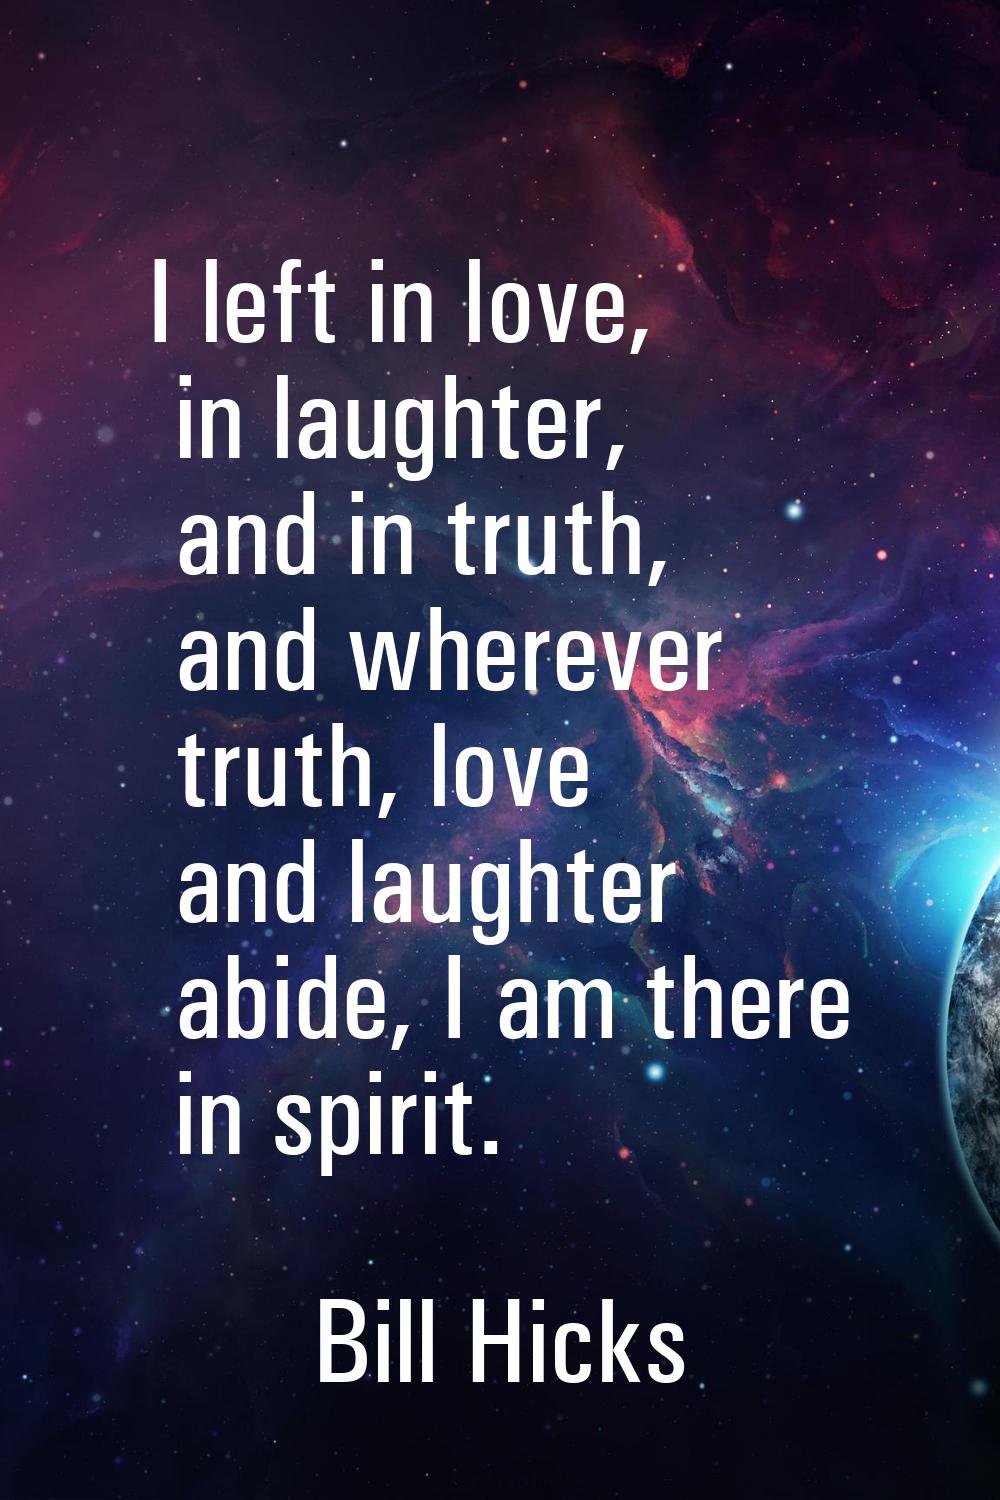 I left in love, in laughter, and in truth, and wherever truth, love and laughter abide, I am there 